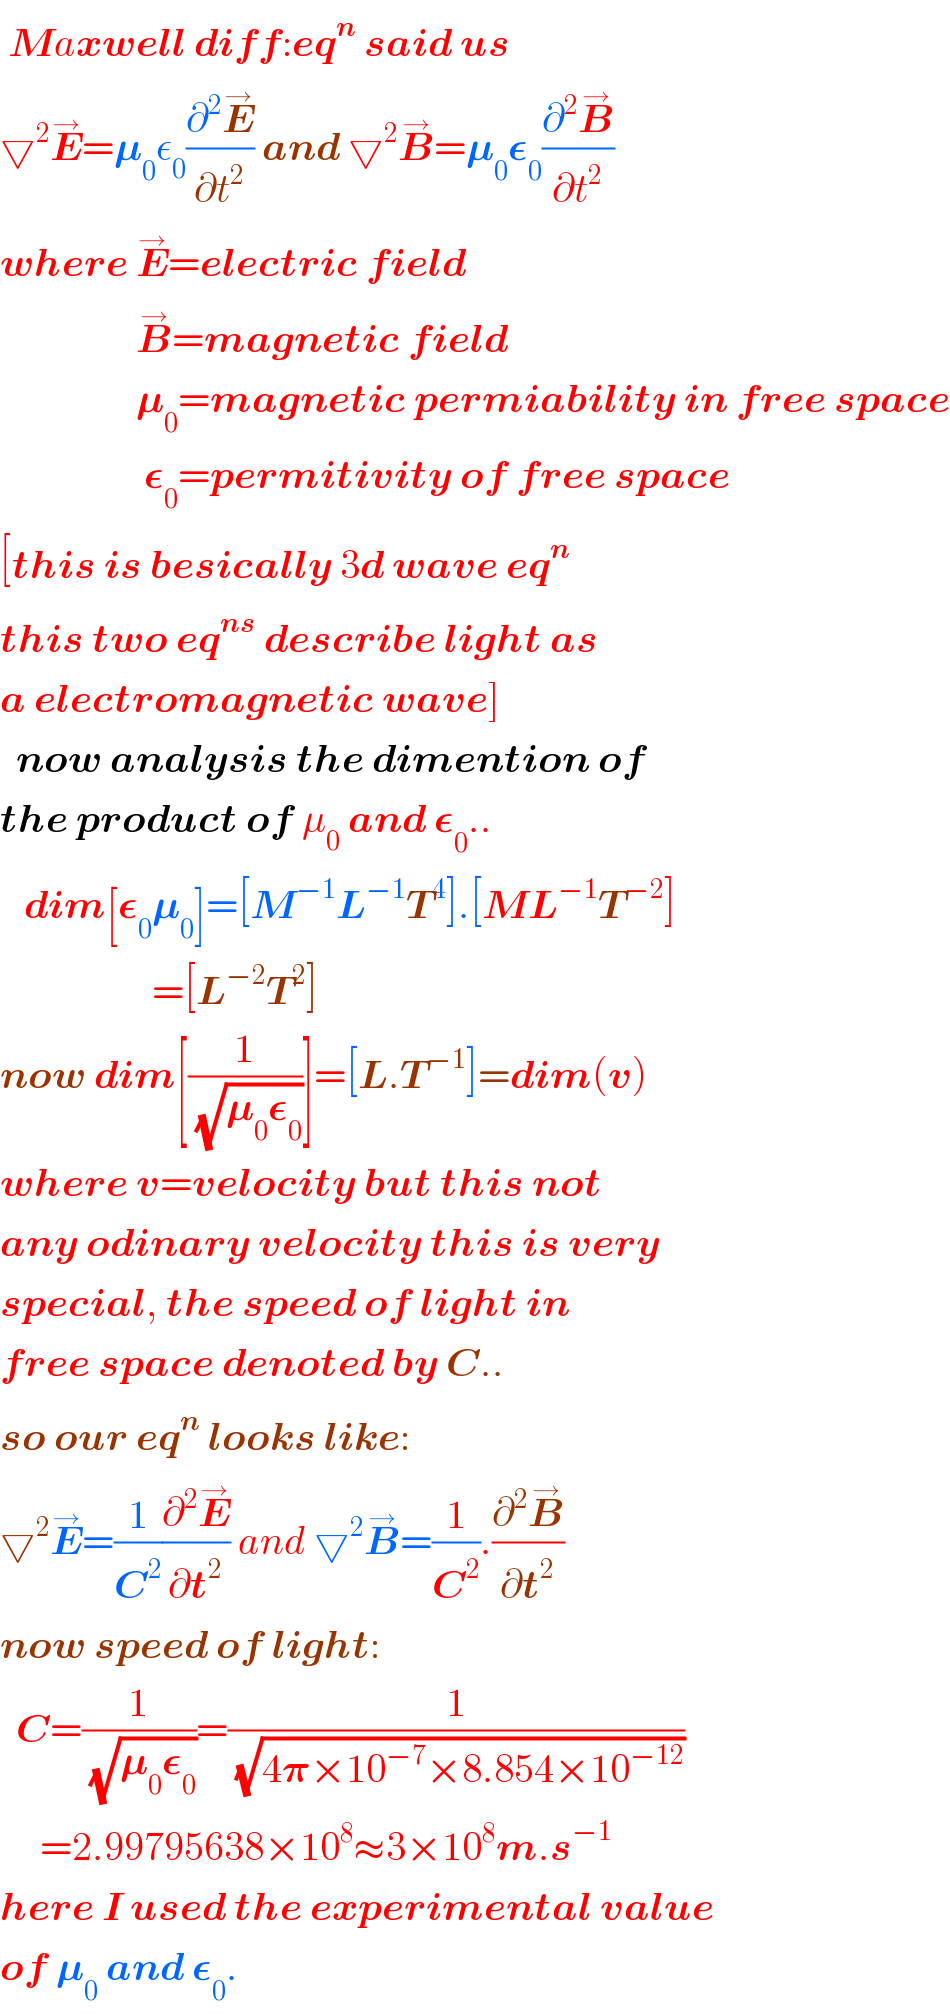  Maxwell diff:eq^n  said us  ▽^2 E^→ =𝛍_0 ε_0 (∂^2 E^→ /∂t^2 ) and ▽^2 B^→ =𝛍_0 𝛆_0 (∂^2 B^→ /∂t^2 )  where E^→ =electric field                   B^→ =magnetic field                   𝛍_0 =magnetic permiability in free space                    𝛆_0 =permitivity of free space  [this is besically 3d wave eq^n   this two eq^(ns)  describe light as  a electromagnetic wave]    now analysis the dimention of  the product of μ_0  and 𝛆_0 ..     dim[𝛆_0 𝛍_0 ]=[M^(−1) L^(−1) T^4 ].[ML^(−1) T^(−2) ]                     =[L^(−2) T^2 ]  now dim[(1/(√(𝛍_0 𝛆_0 )))]=[L.T^(−1) ]=dim(v)  where v=velocity but this not  any odinary velocity this is very  special, the speed of light in  free space denoted by C..  so our eq^n  looks like:  ▽^2 E^→ =(1/C^2 )(∂^2 E^→ /∂t^2 ) and ▽^2 B^→ =(1/C^2 ).(∂^2 B^→ /∂t^2 )  now speed of light:    C=(1/(√(𝛍_0 𝛆_0 )))=(1/(√(4𝛑×10^(−7) ×8.854×10^(−12) )))       =2.99795638×10^8 ≈3×10^8 m.s^(−1)   here I used the experimental value  of 𝛍_0  and 𝛆_0 .  